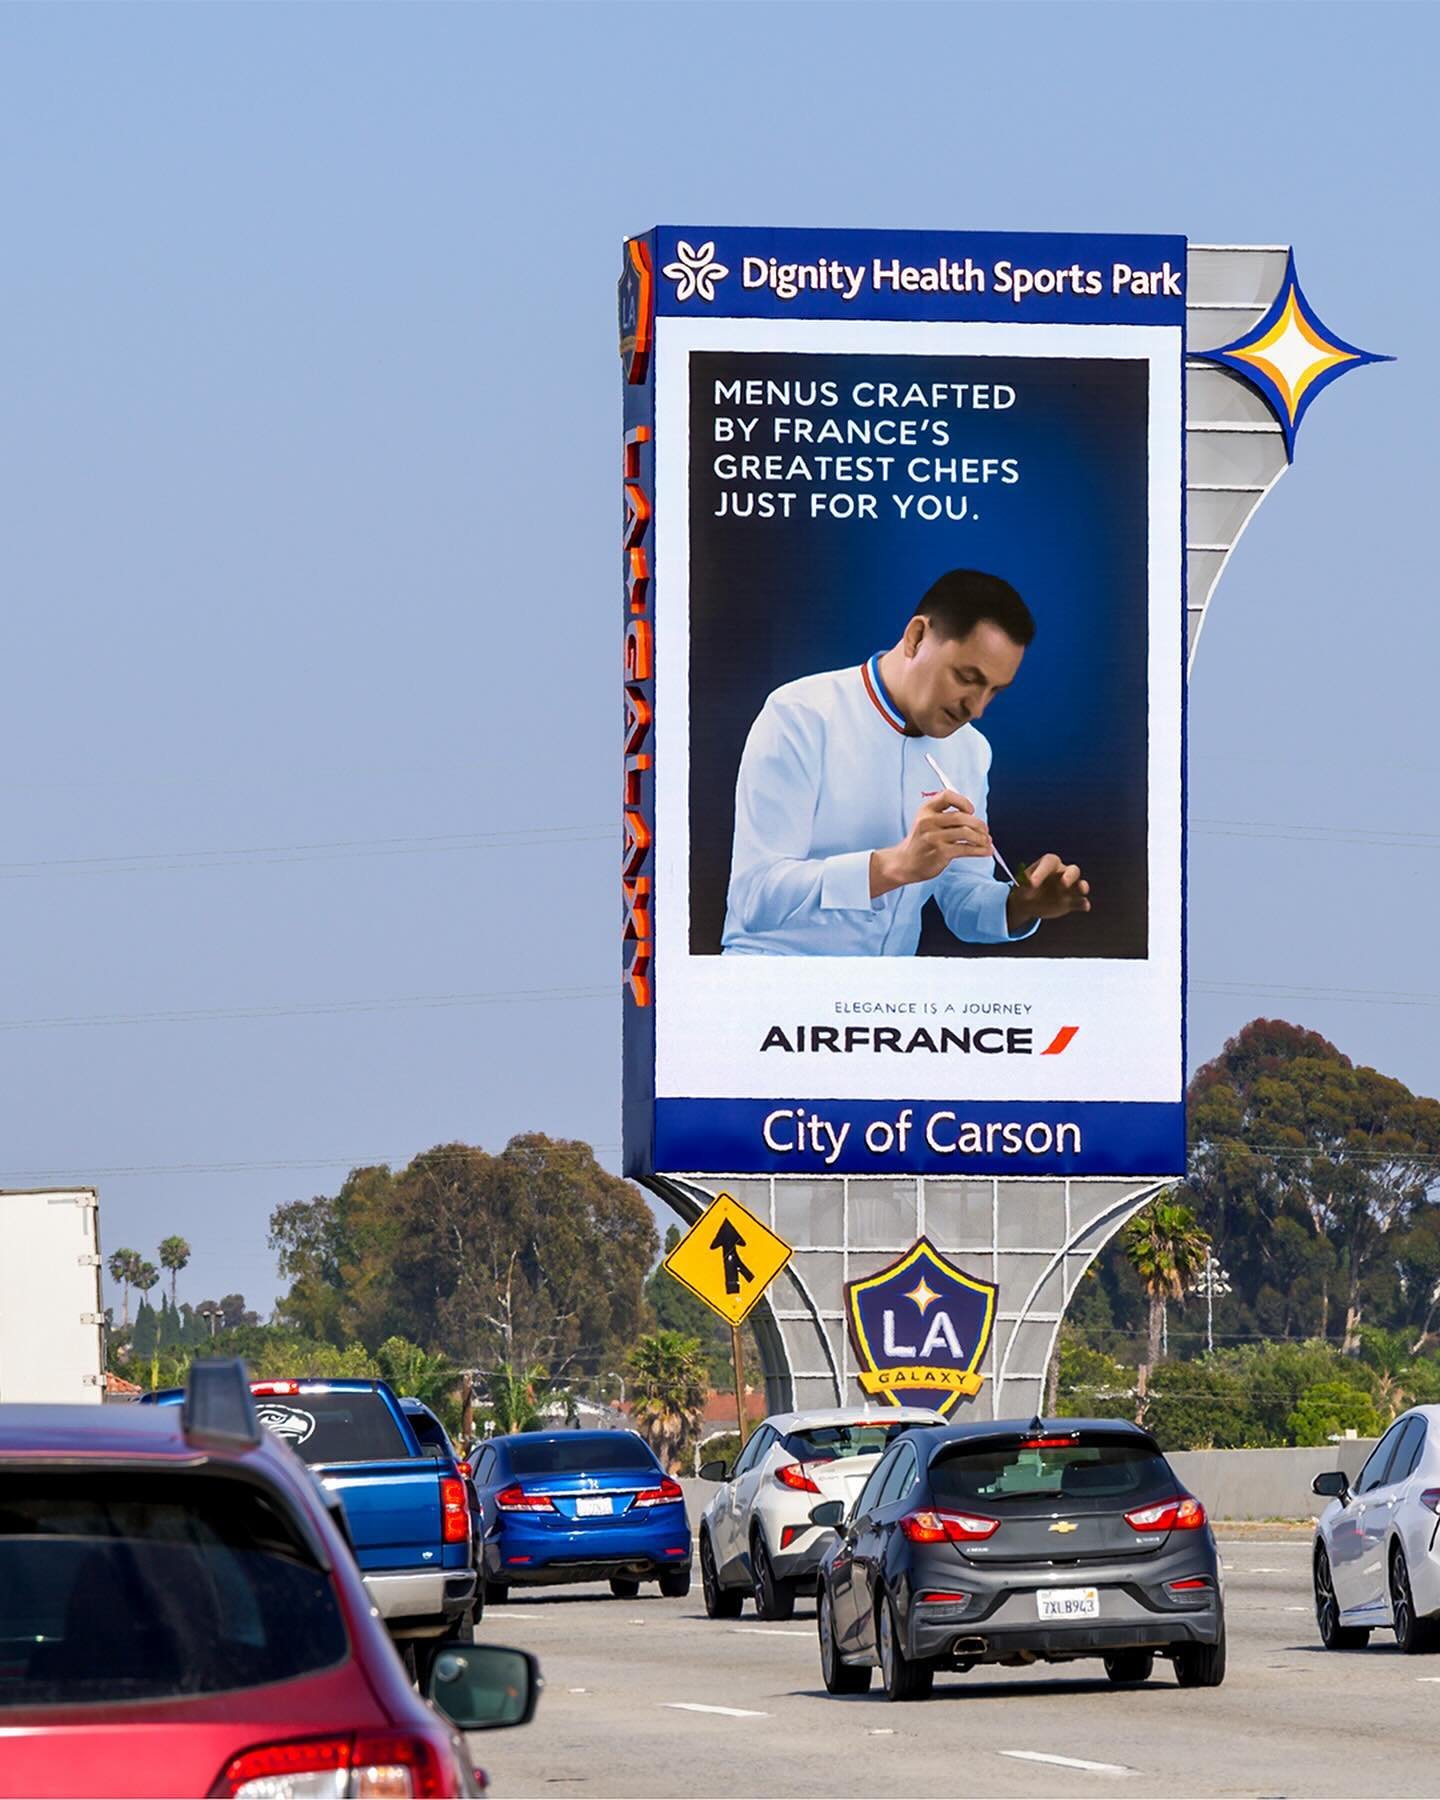 Air France is larger than life on South Bay Pairing, giving us summer vacation vibes on the largest digital freeway media destinations in the area ✈️ 

#iconicmedia #media #ooh #travel #airfrance #wanderlust #summertravel #vacation